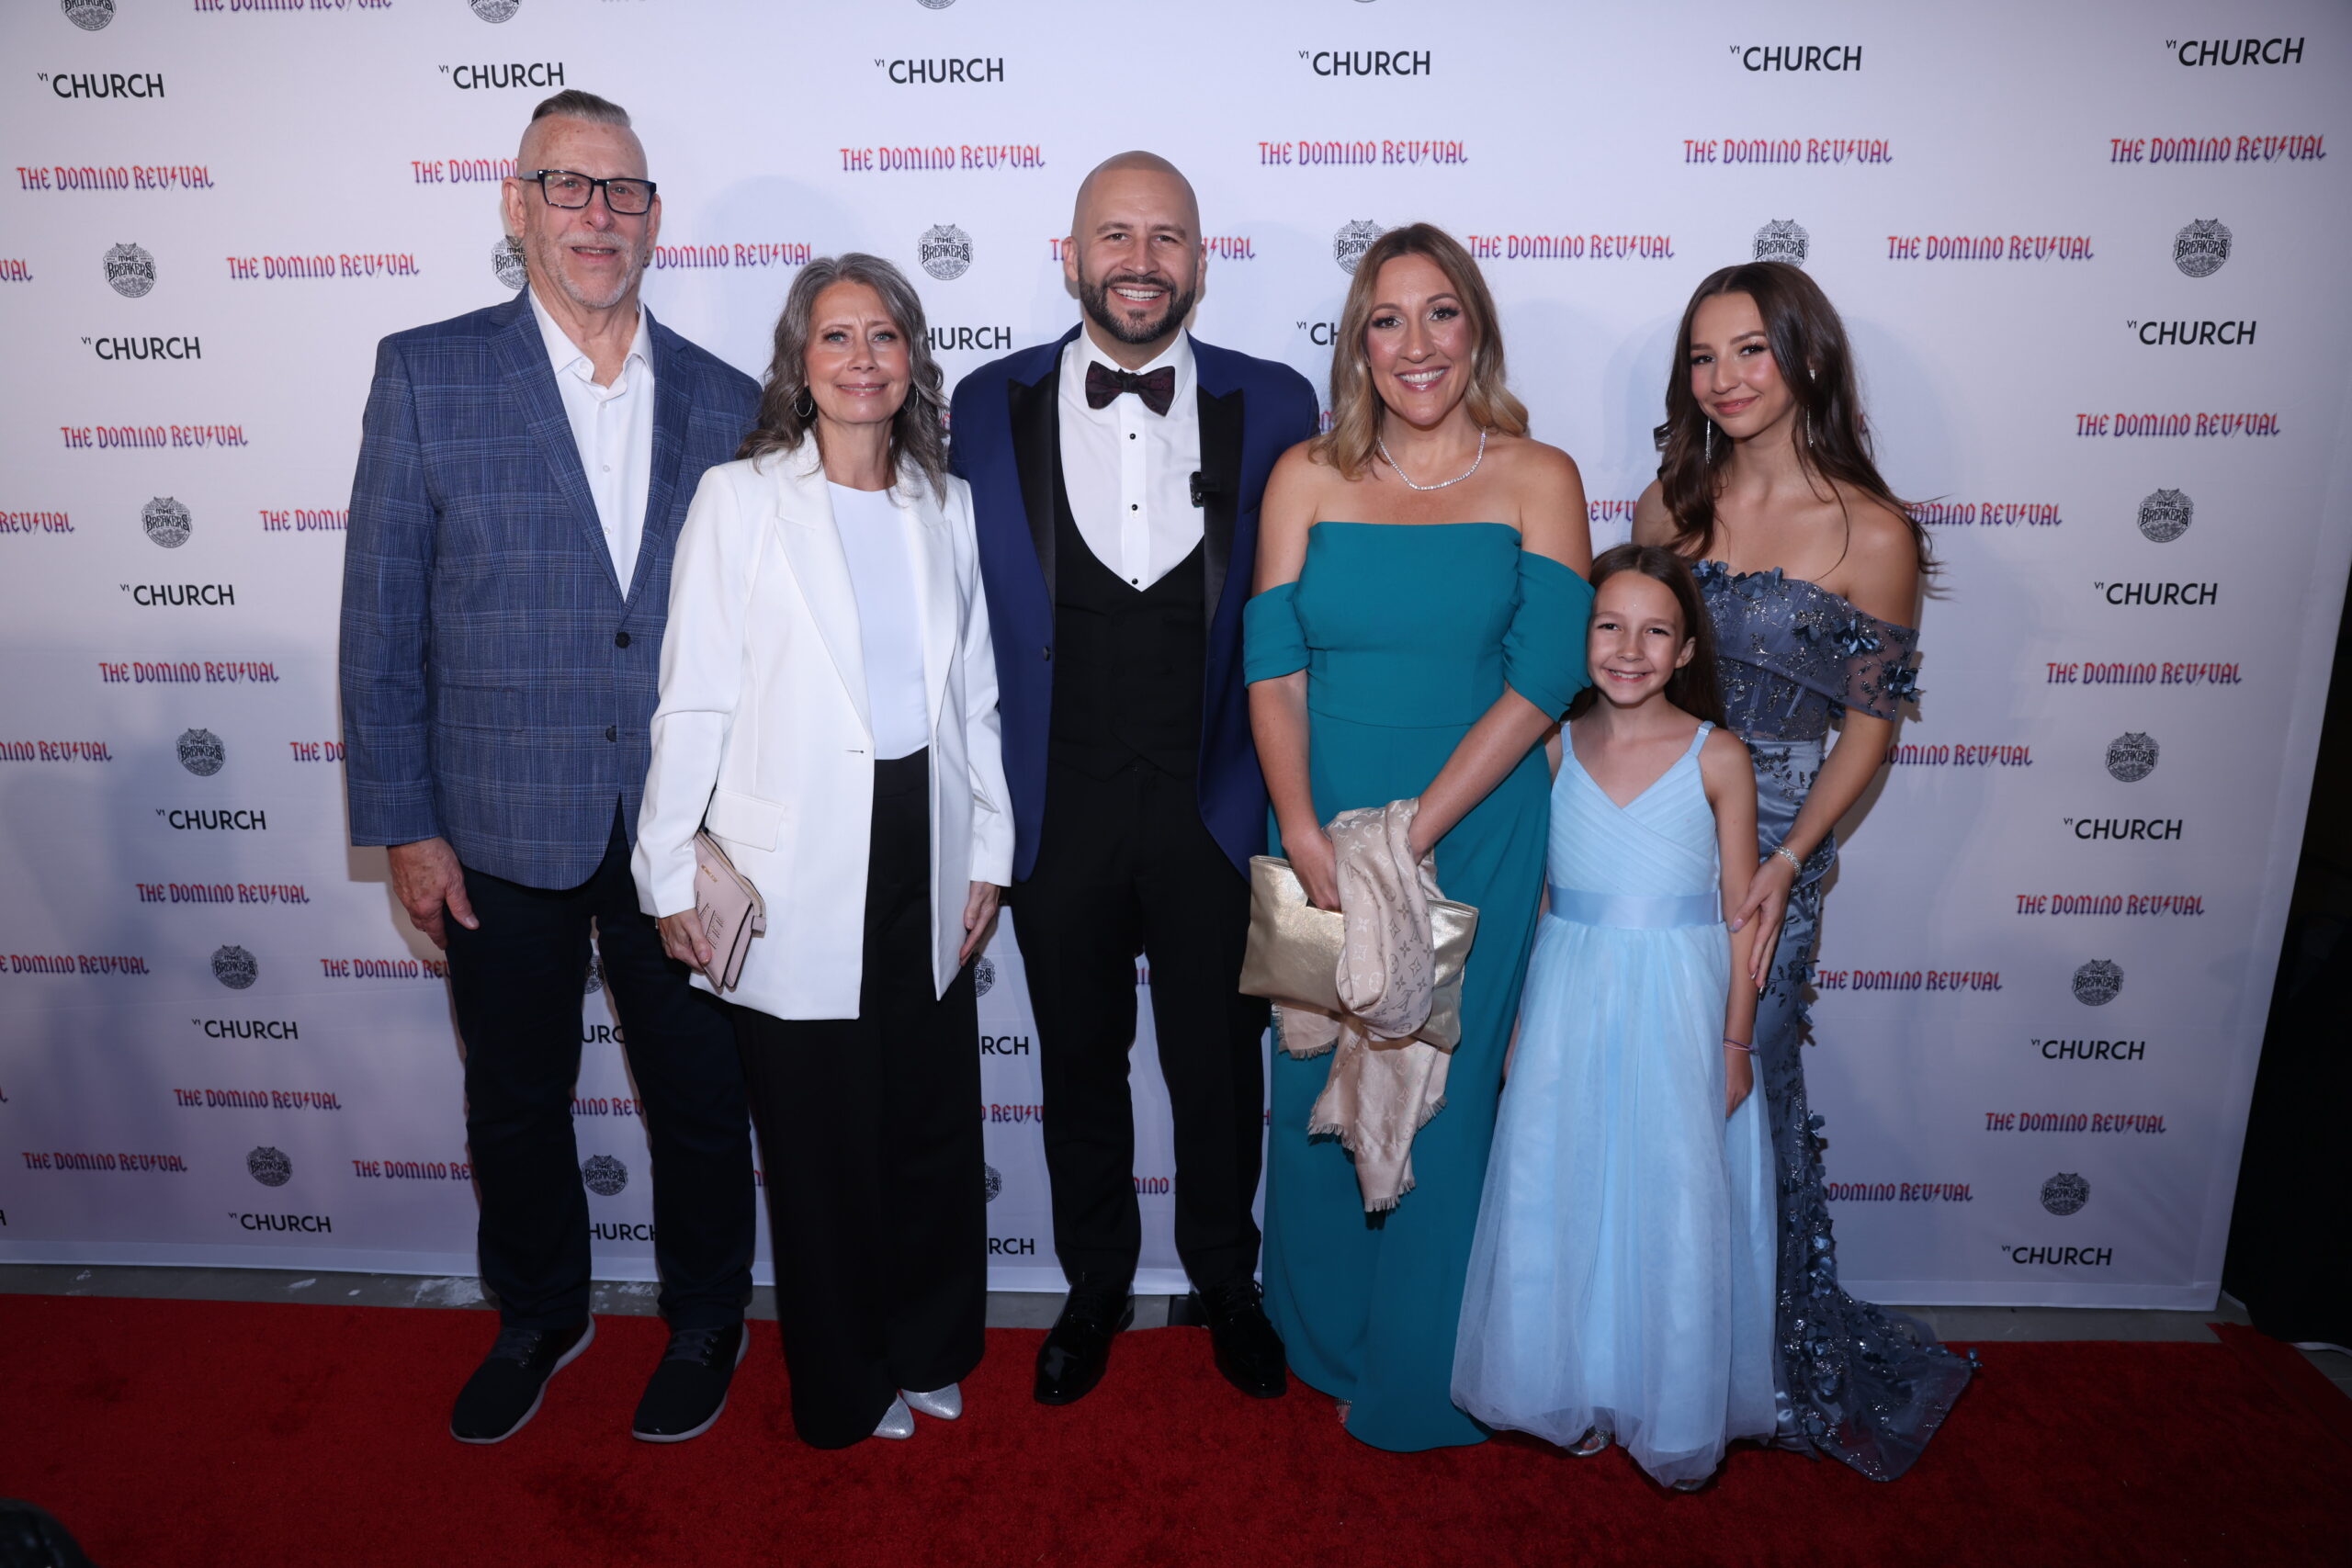 The Signorelli family at the Domino Revival red carpet